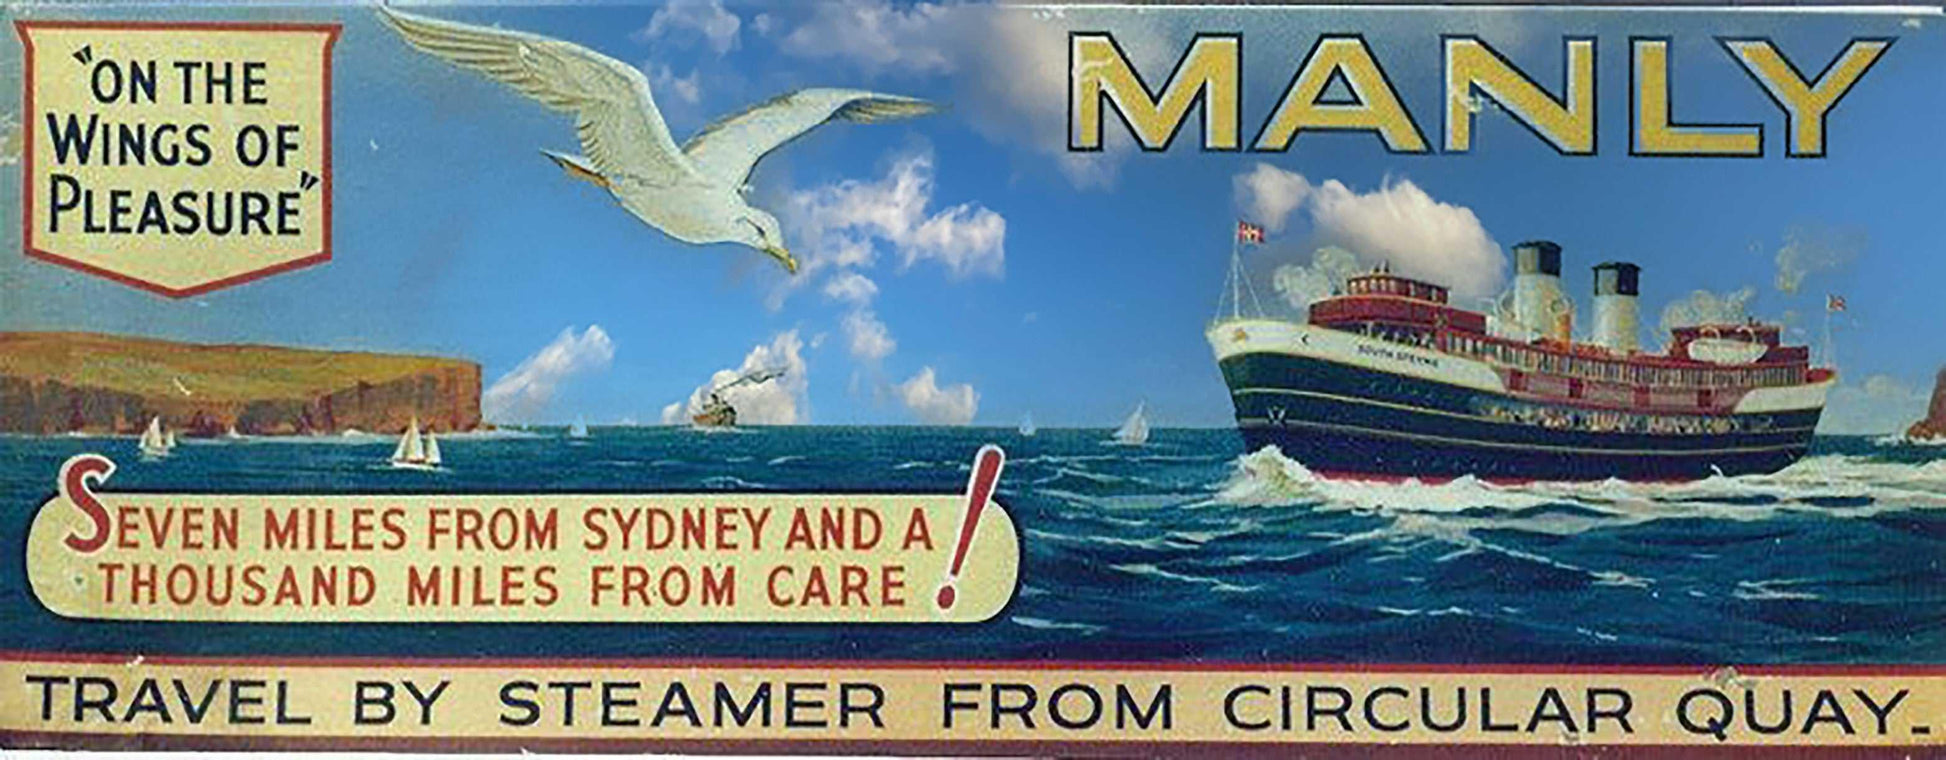 Lost Manly Vintage Posters and Selected Artworks